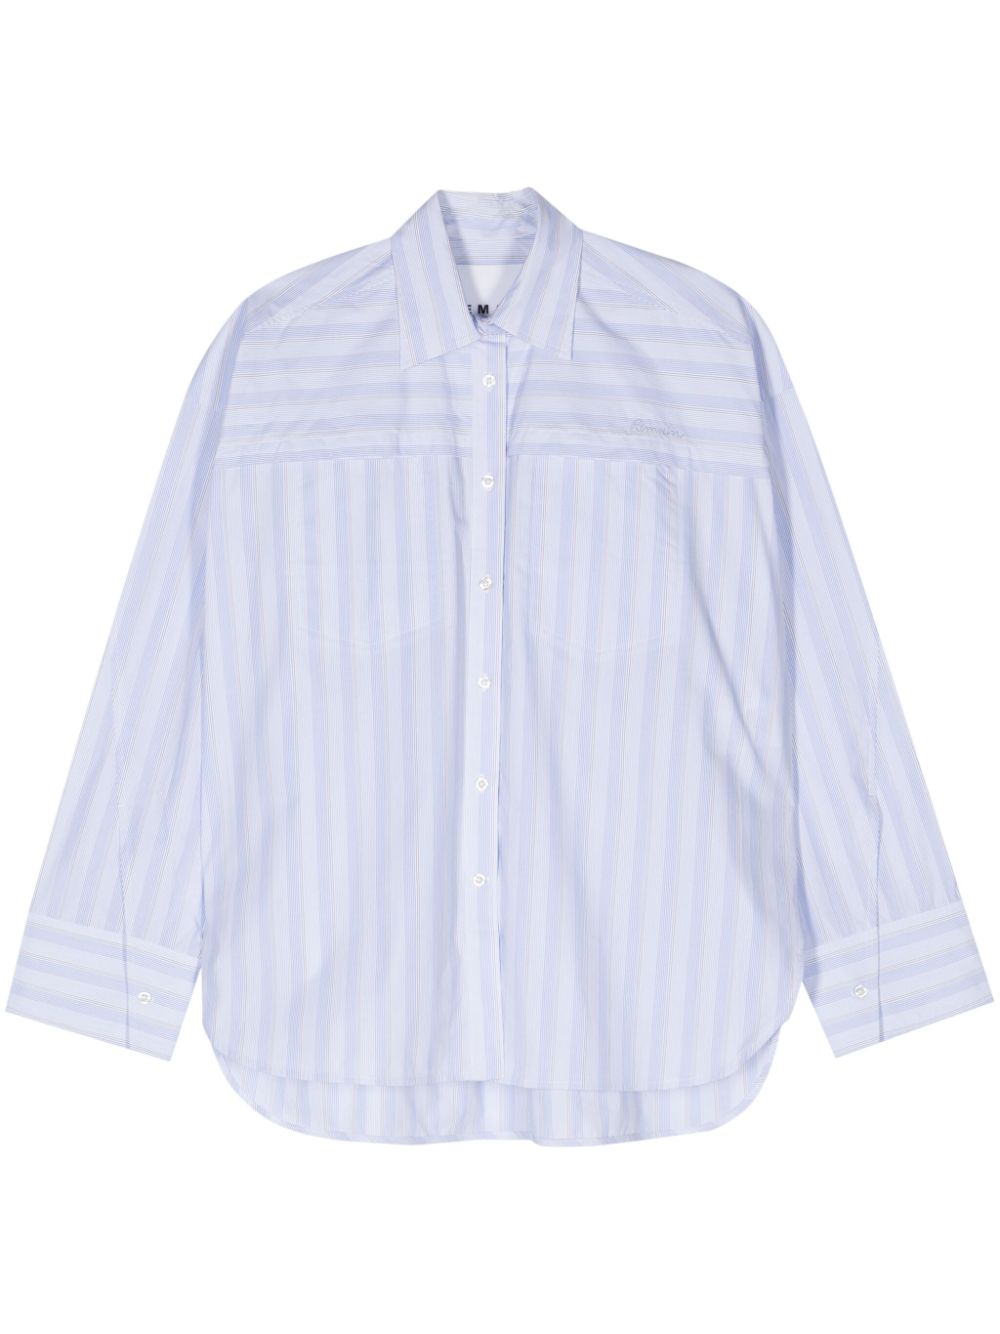 Remain Oversized Shirt In Blue